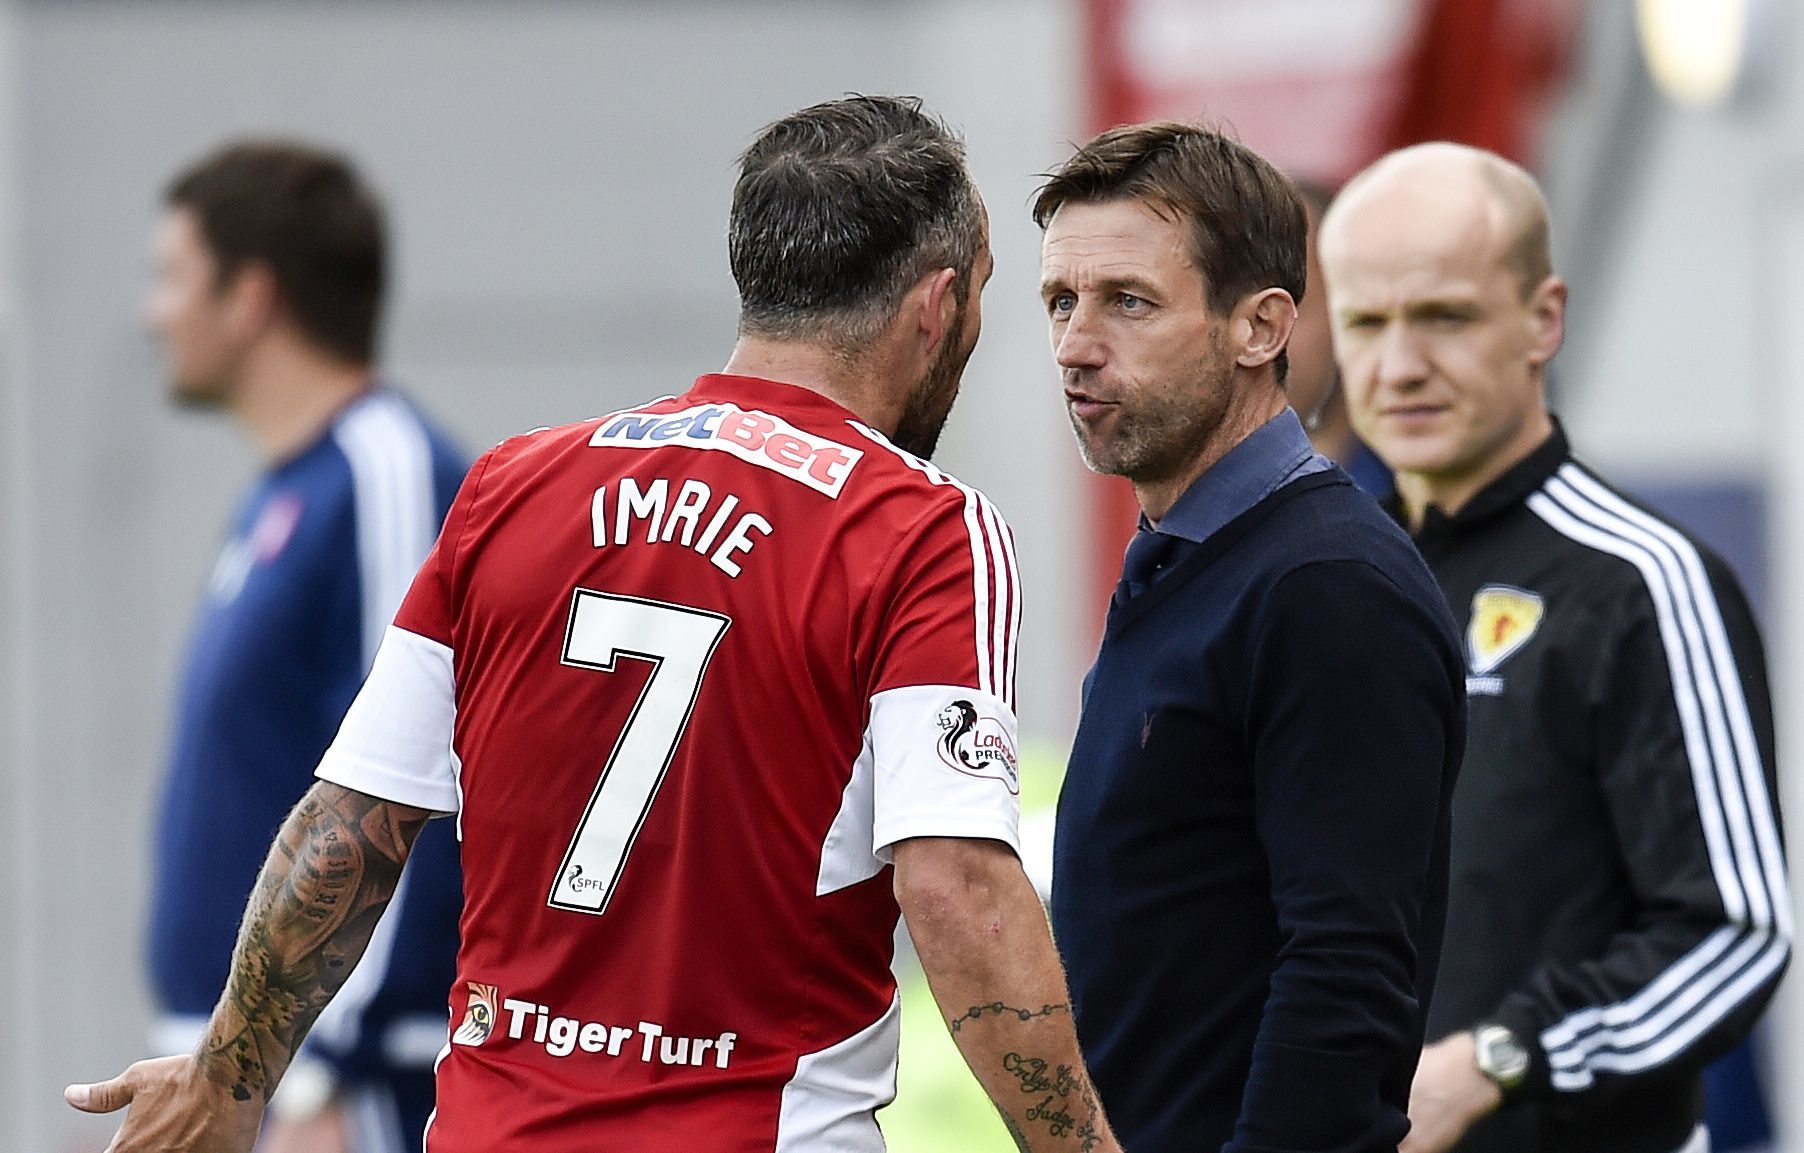 Neil McCann and Dougie Imrie come face to face.